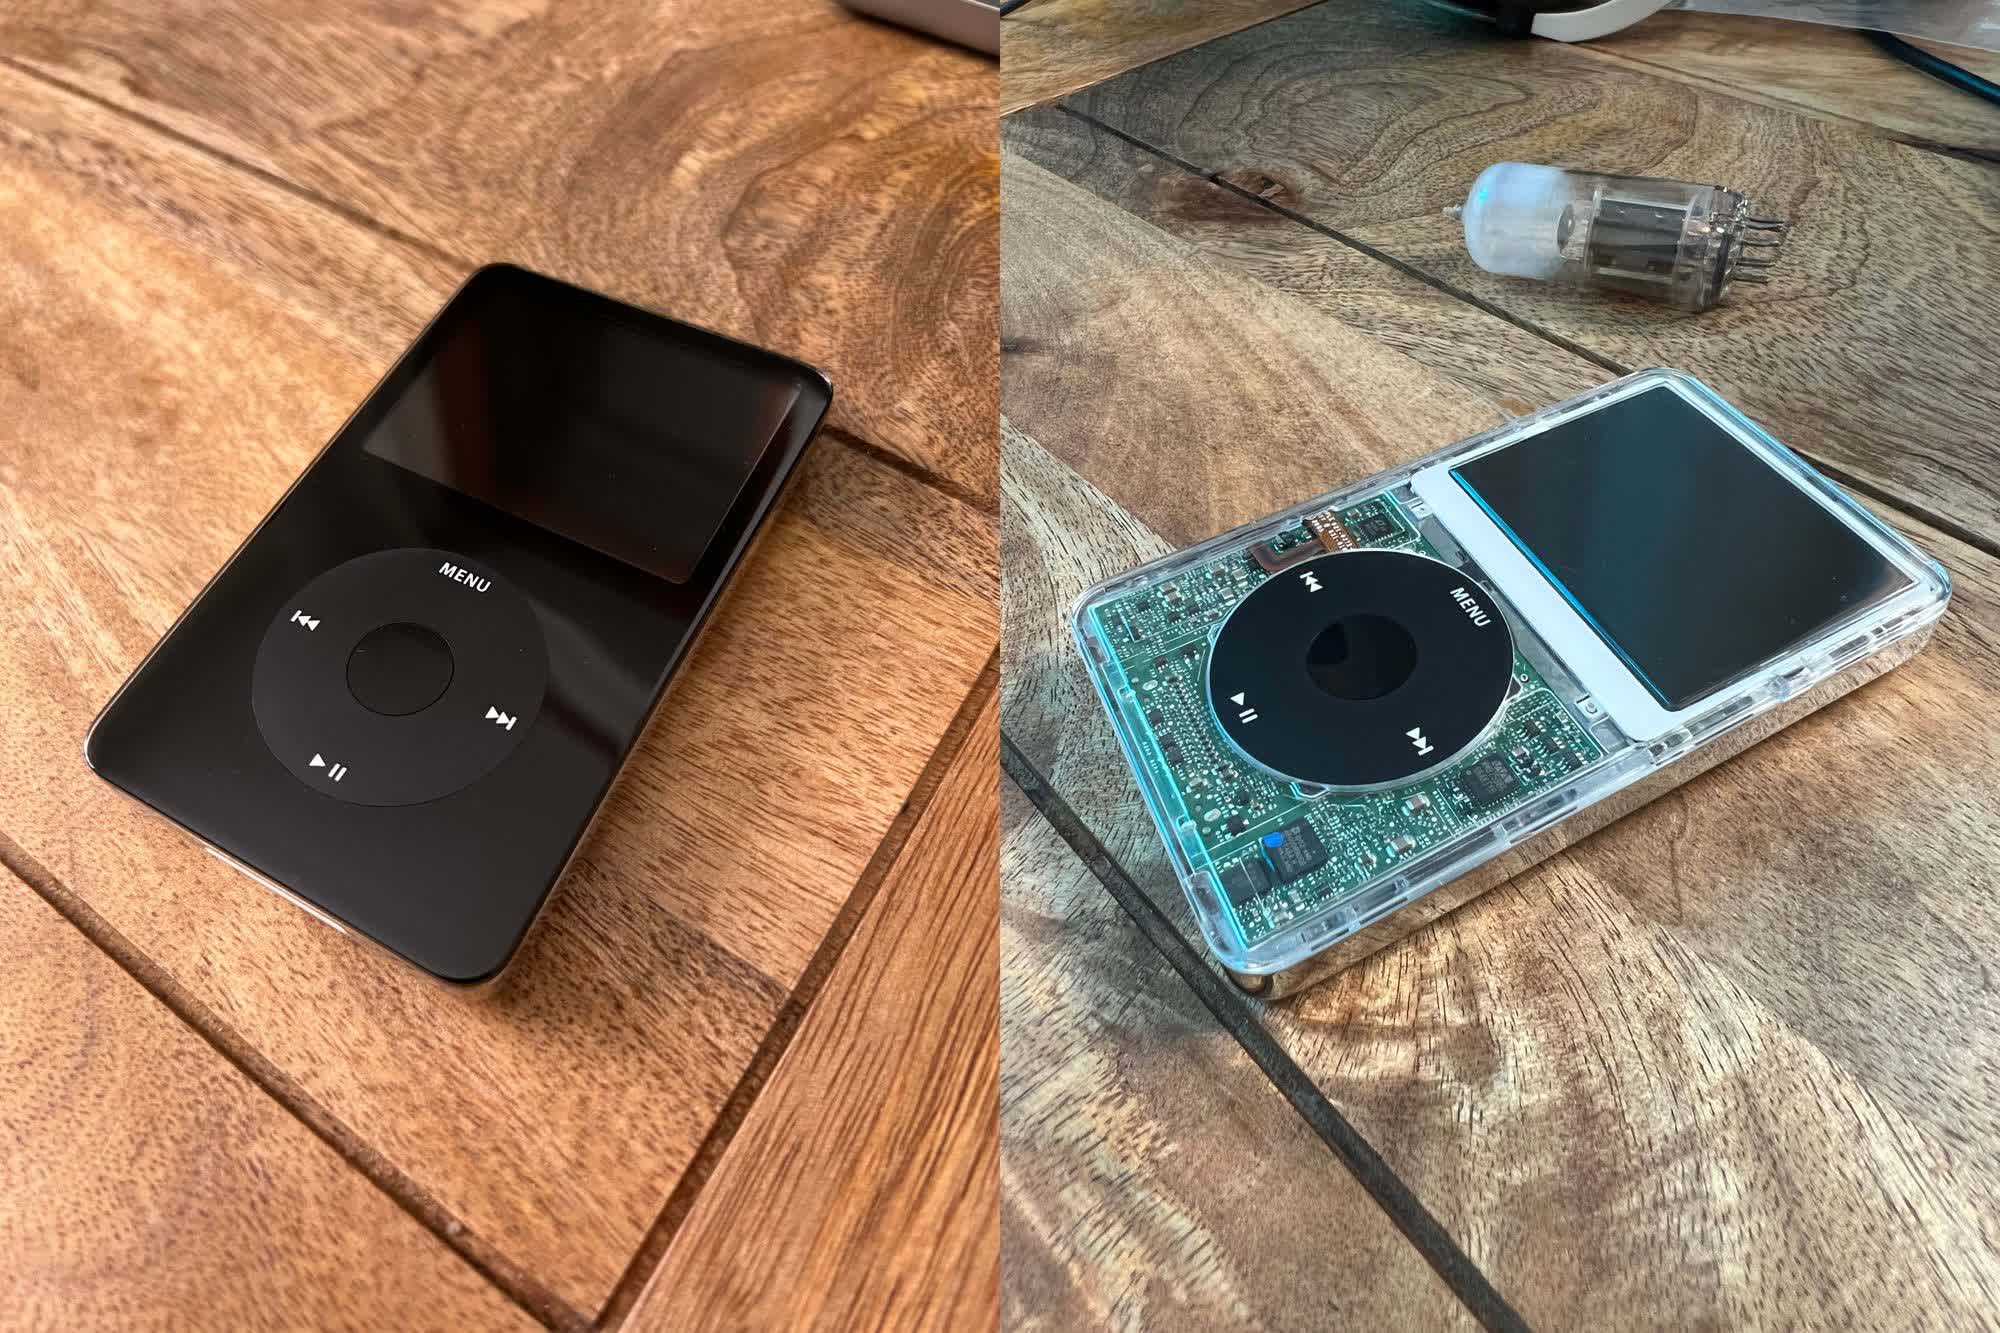 Breathing new life into an old iPod with a few thoughtful upgrades